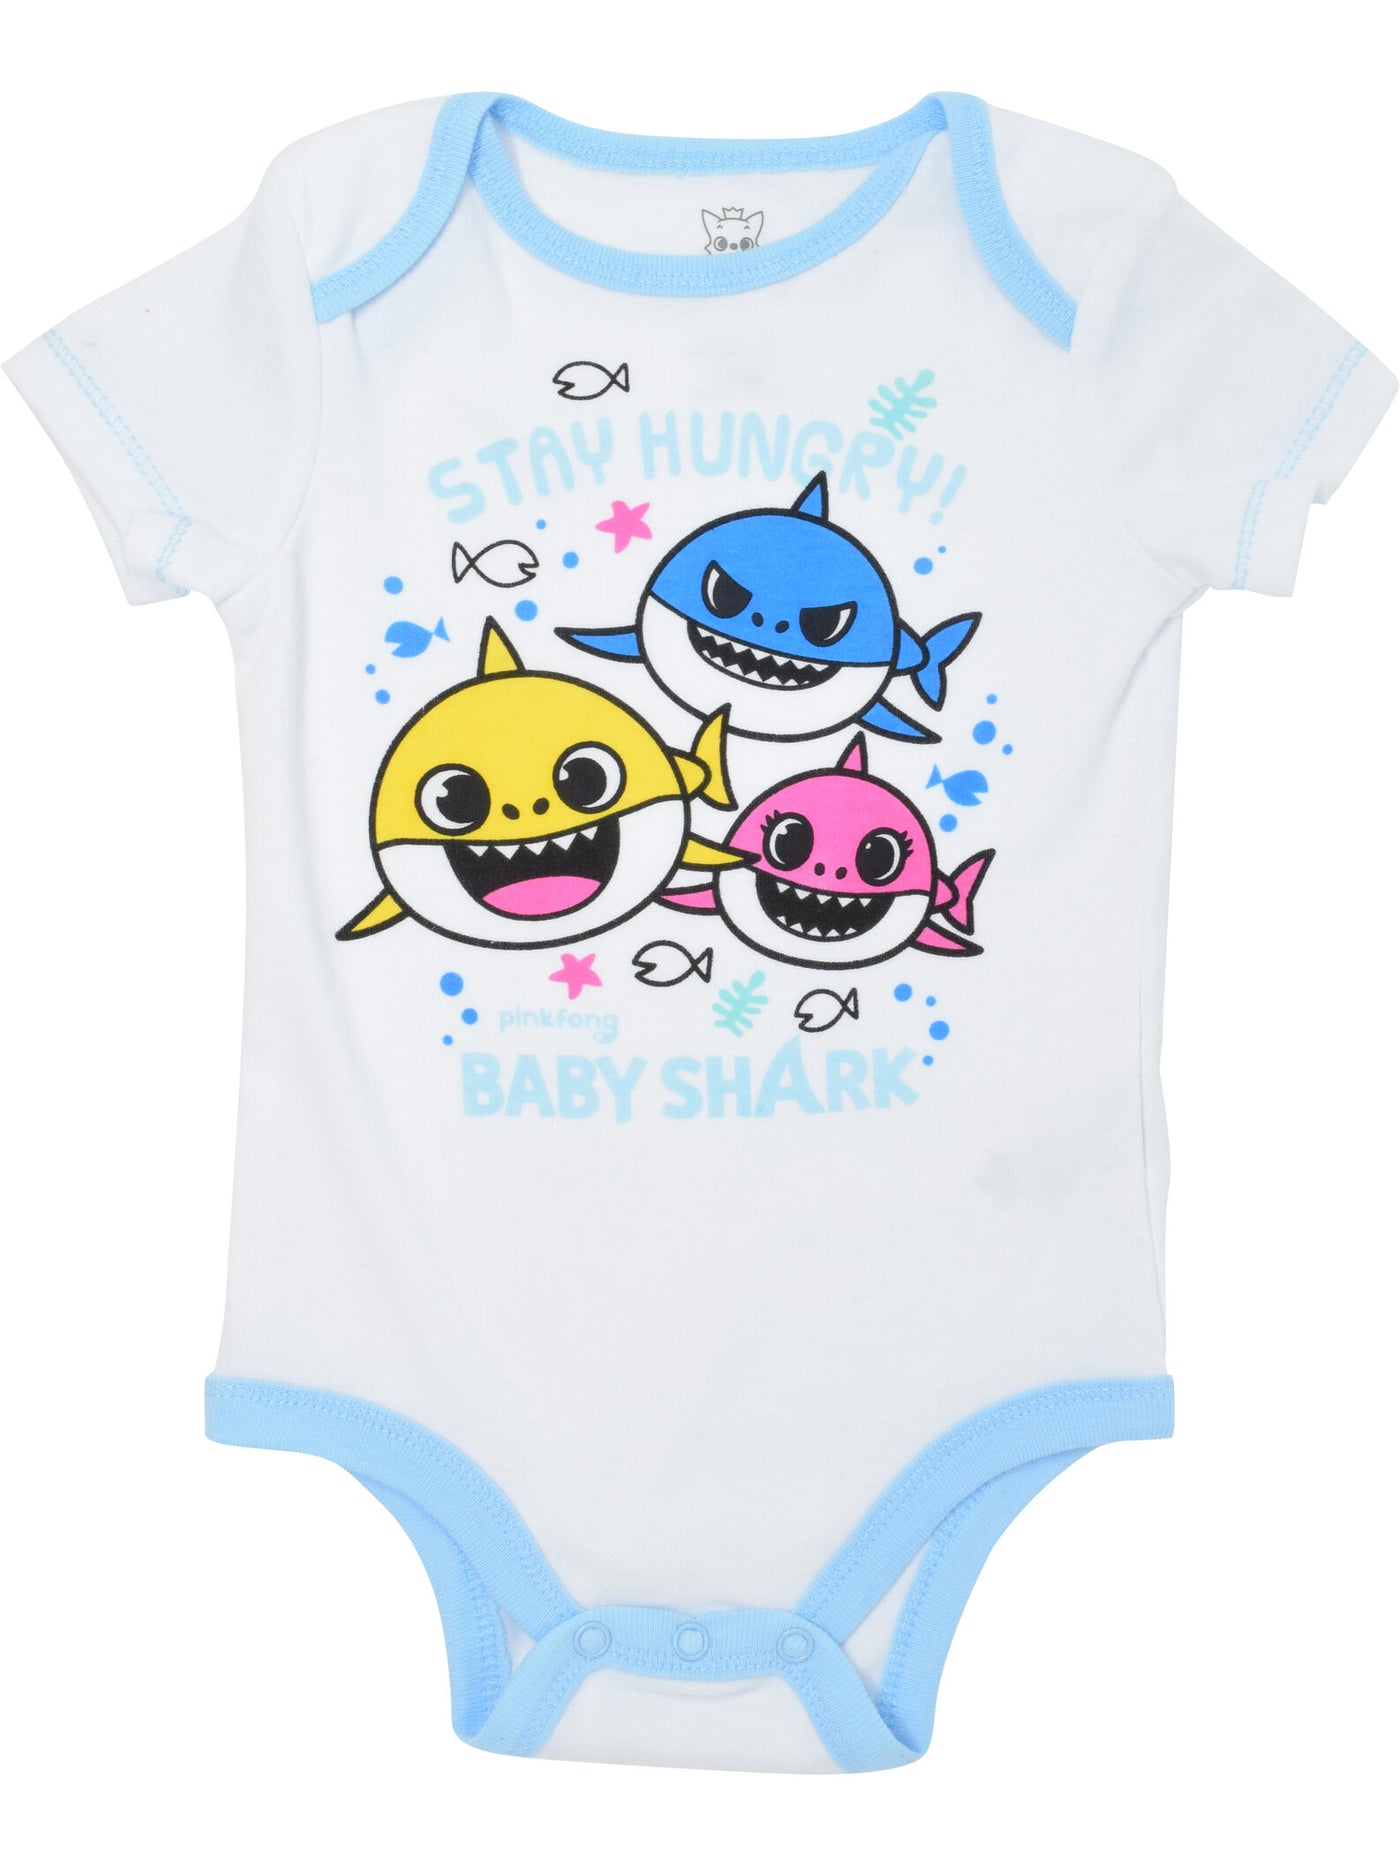 Pinkfong Baby Shark Bodysuit Pants and Bib 3 Piece Outfit Set